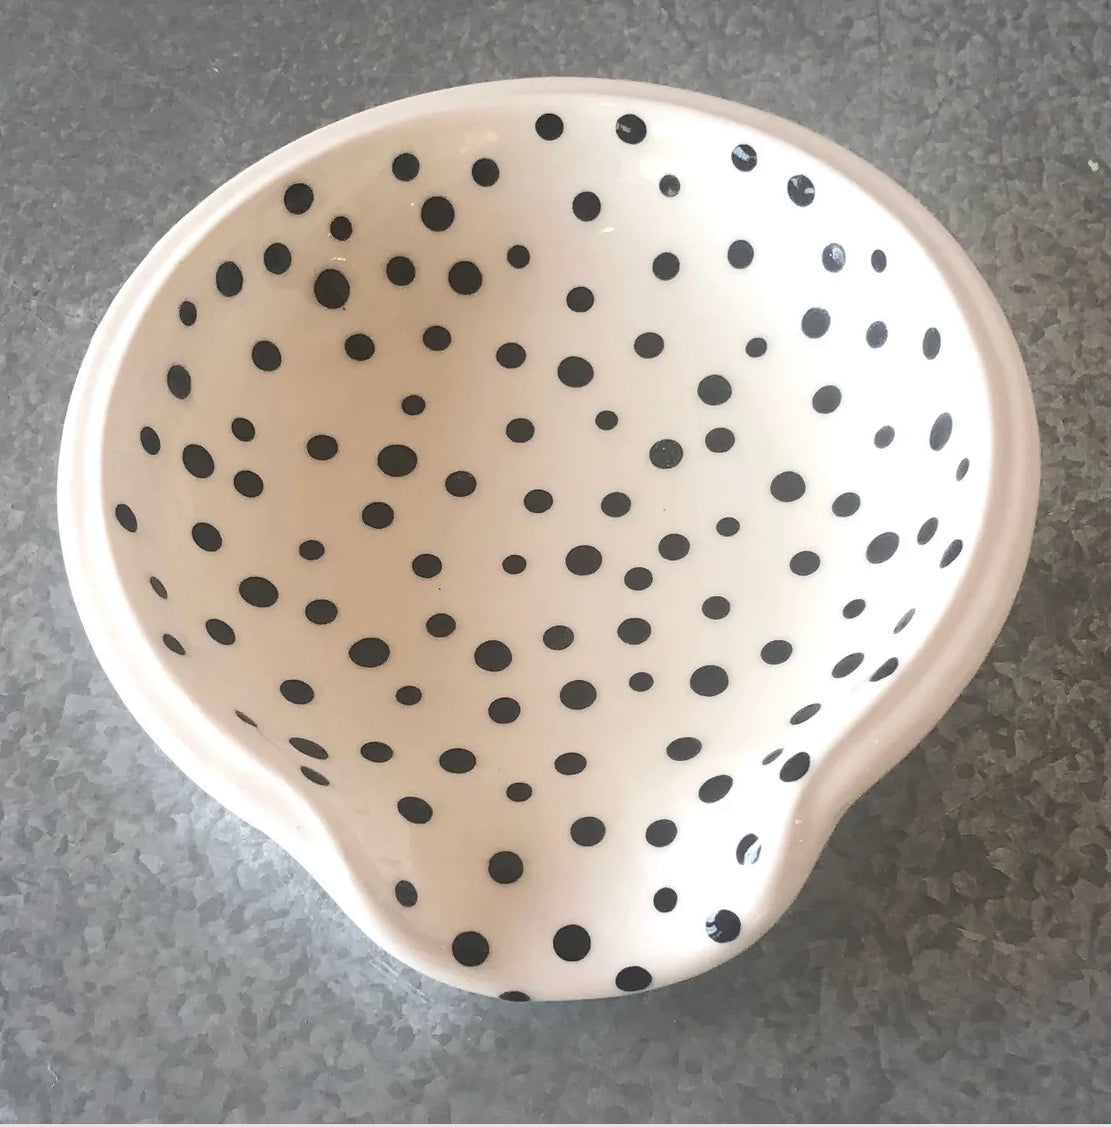 Lots of Dots Spoon Rest